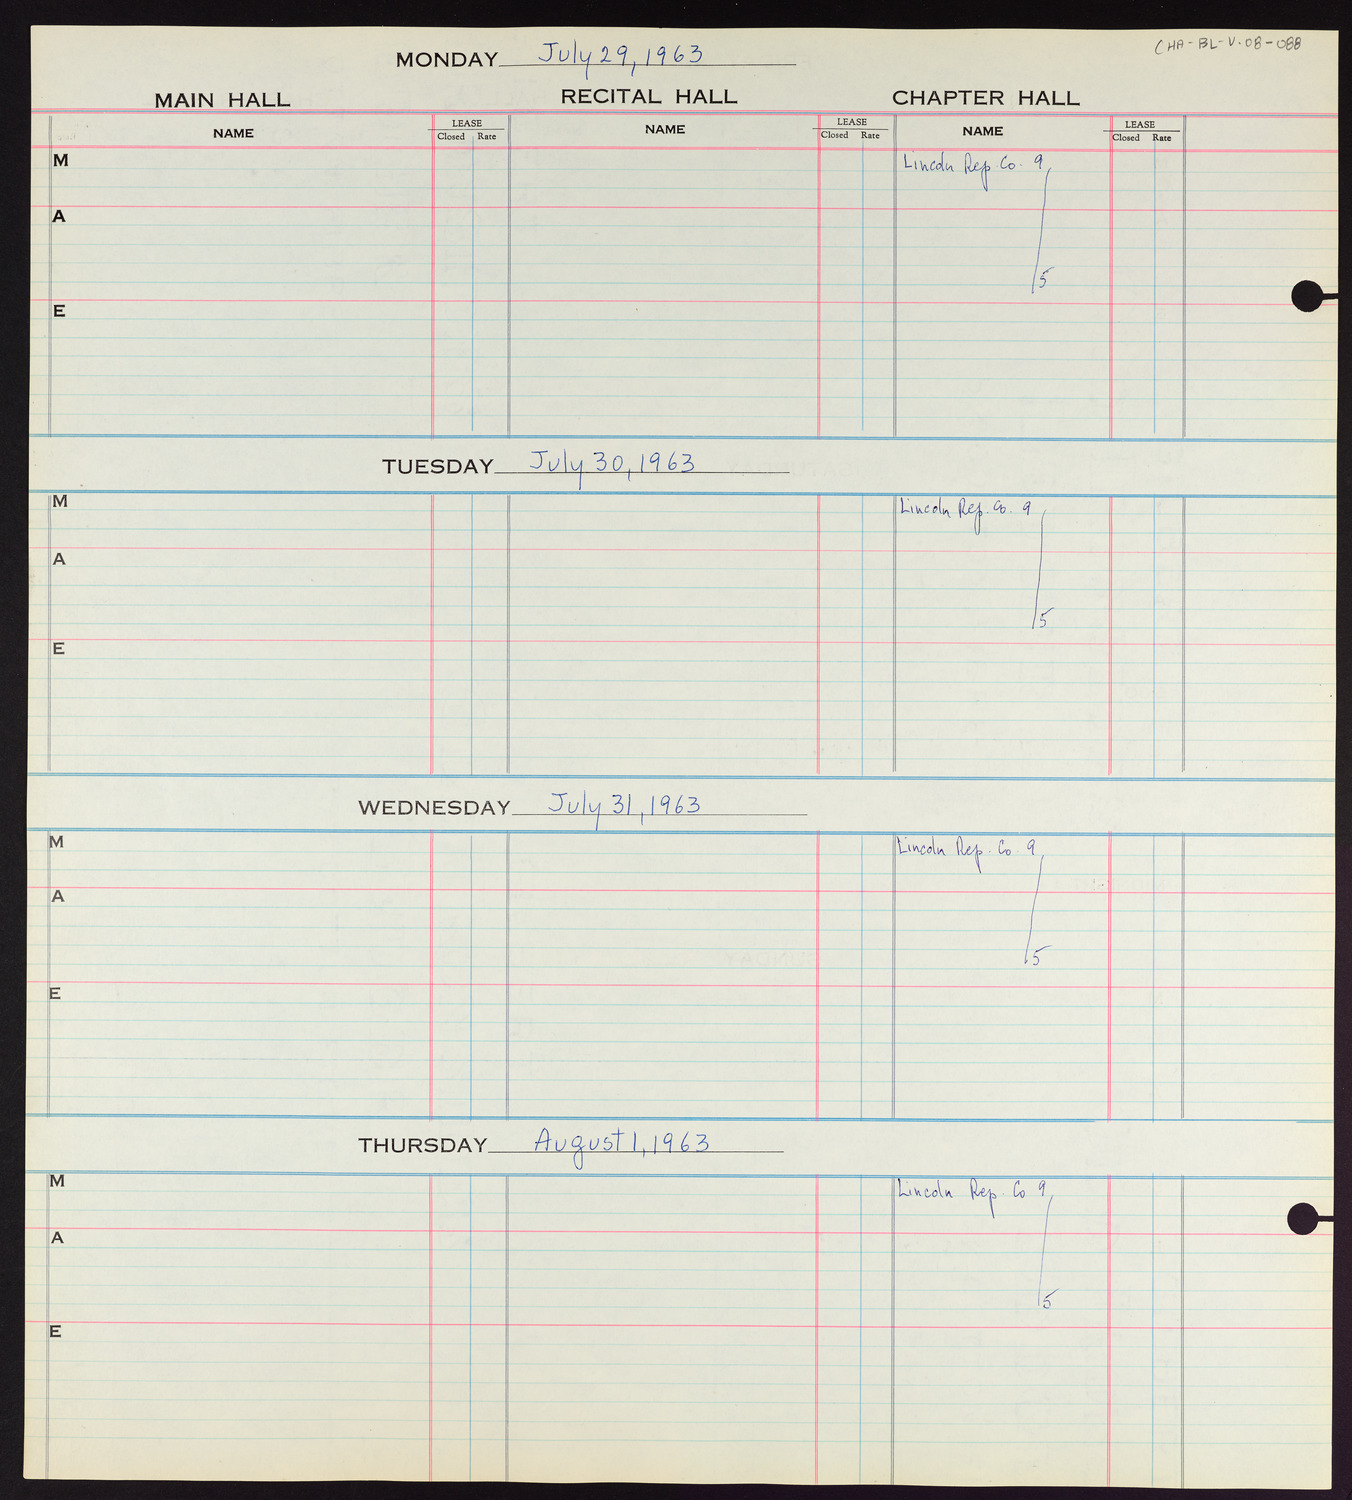 Carnegie Hall Booking Ledger, volume 8, page 88